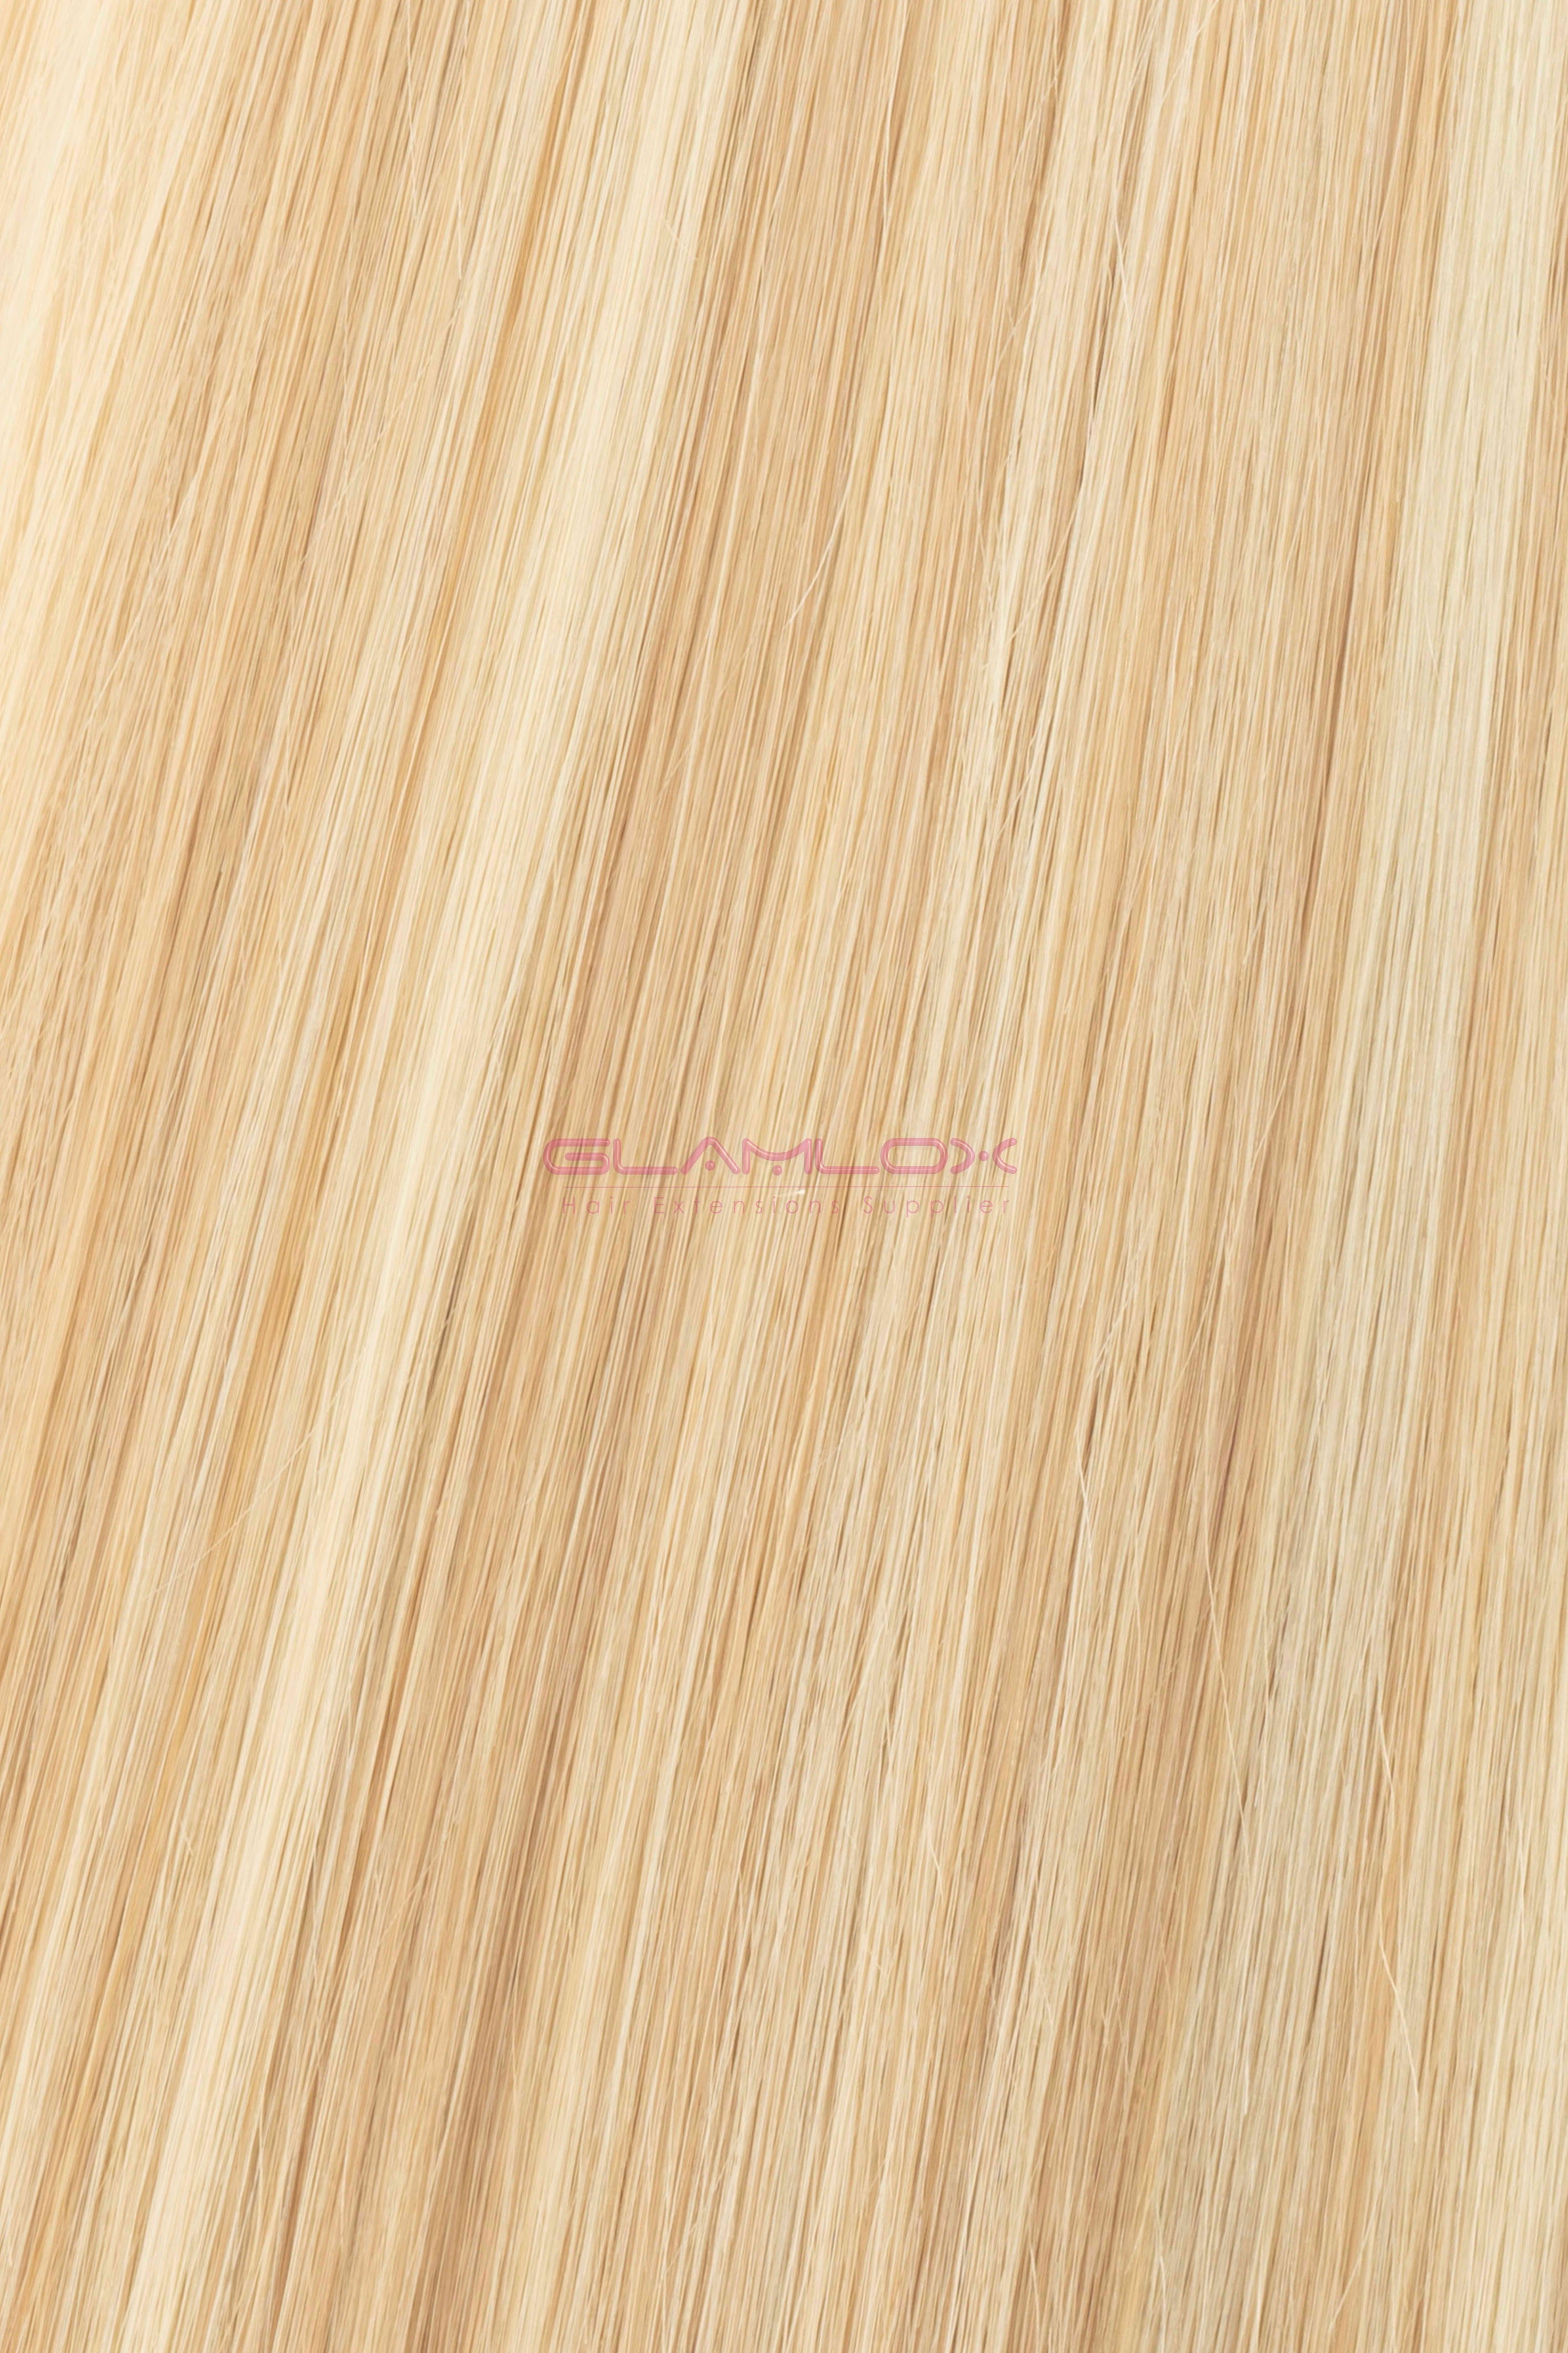 16" Nano Ring Hair Extensions - Russian Mongolian Double Drawn Remy Human Hair - 100 Strands